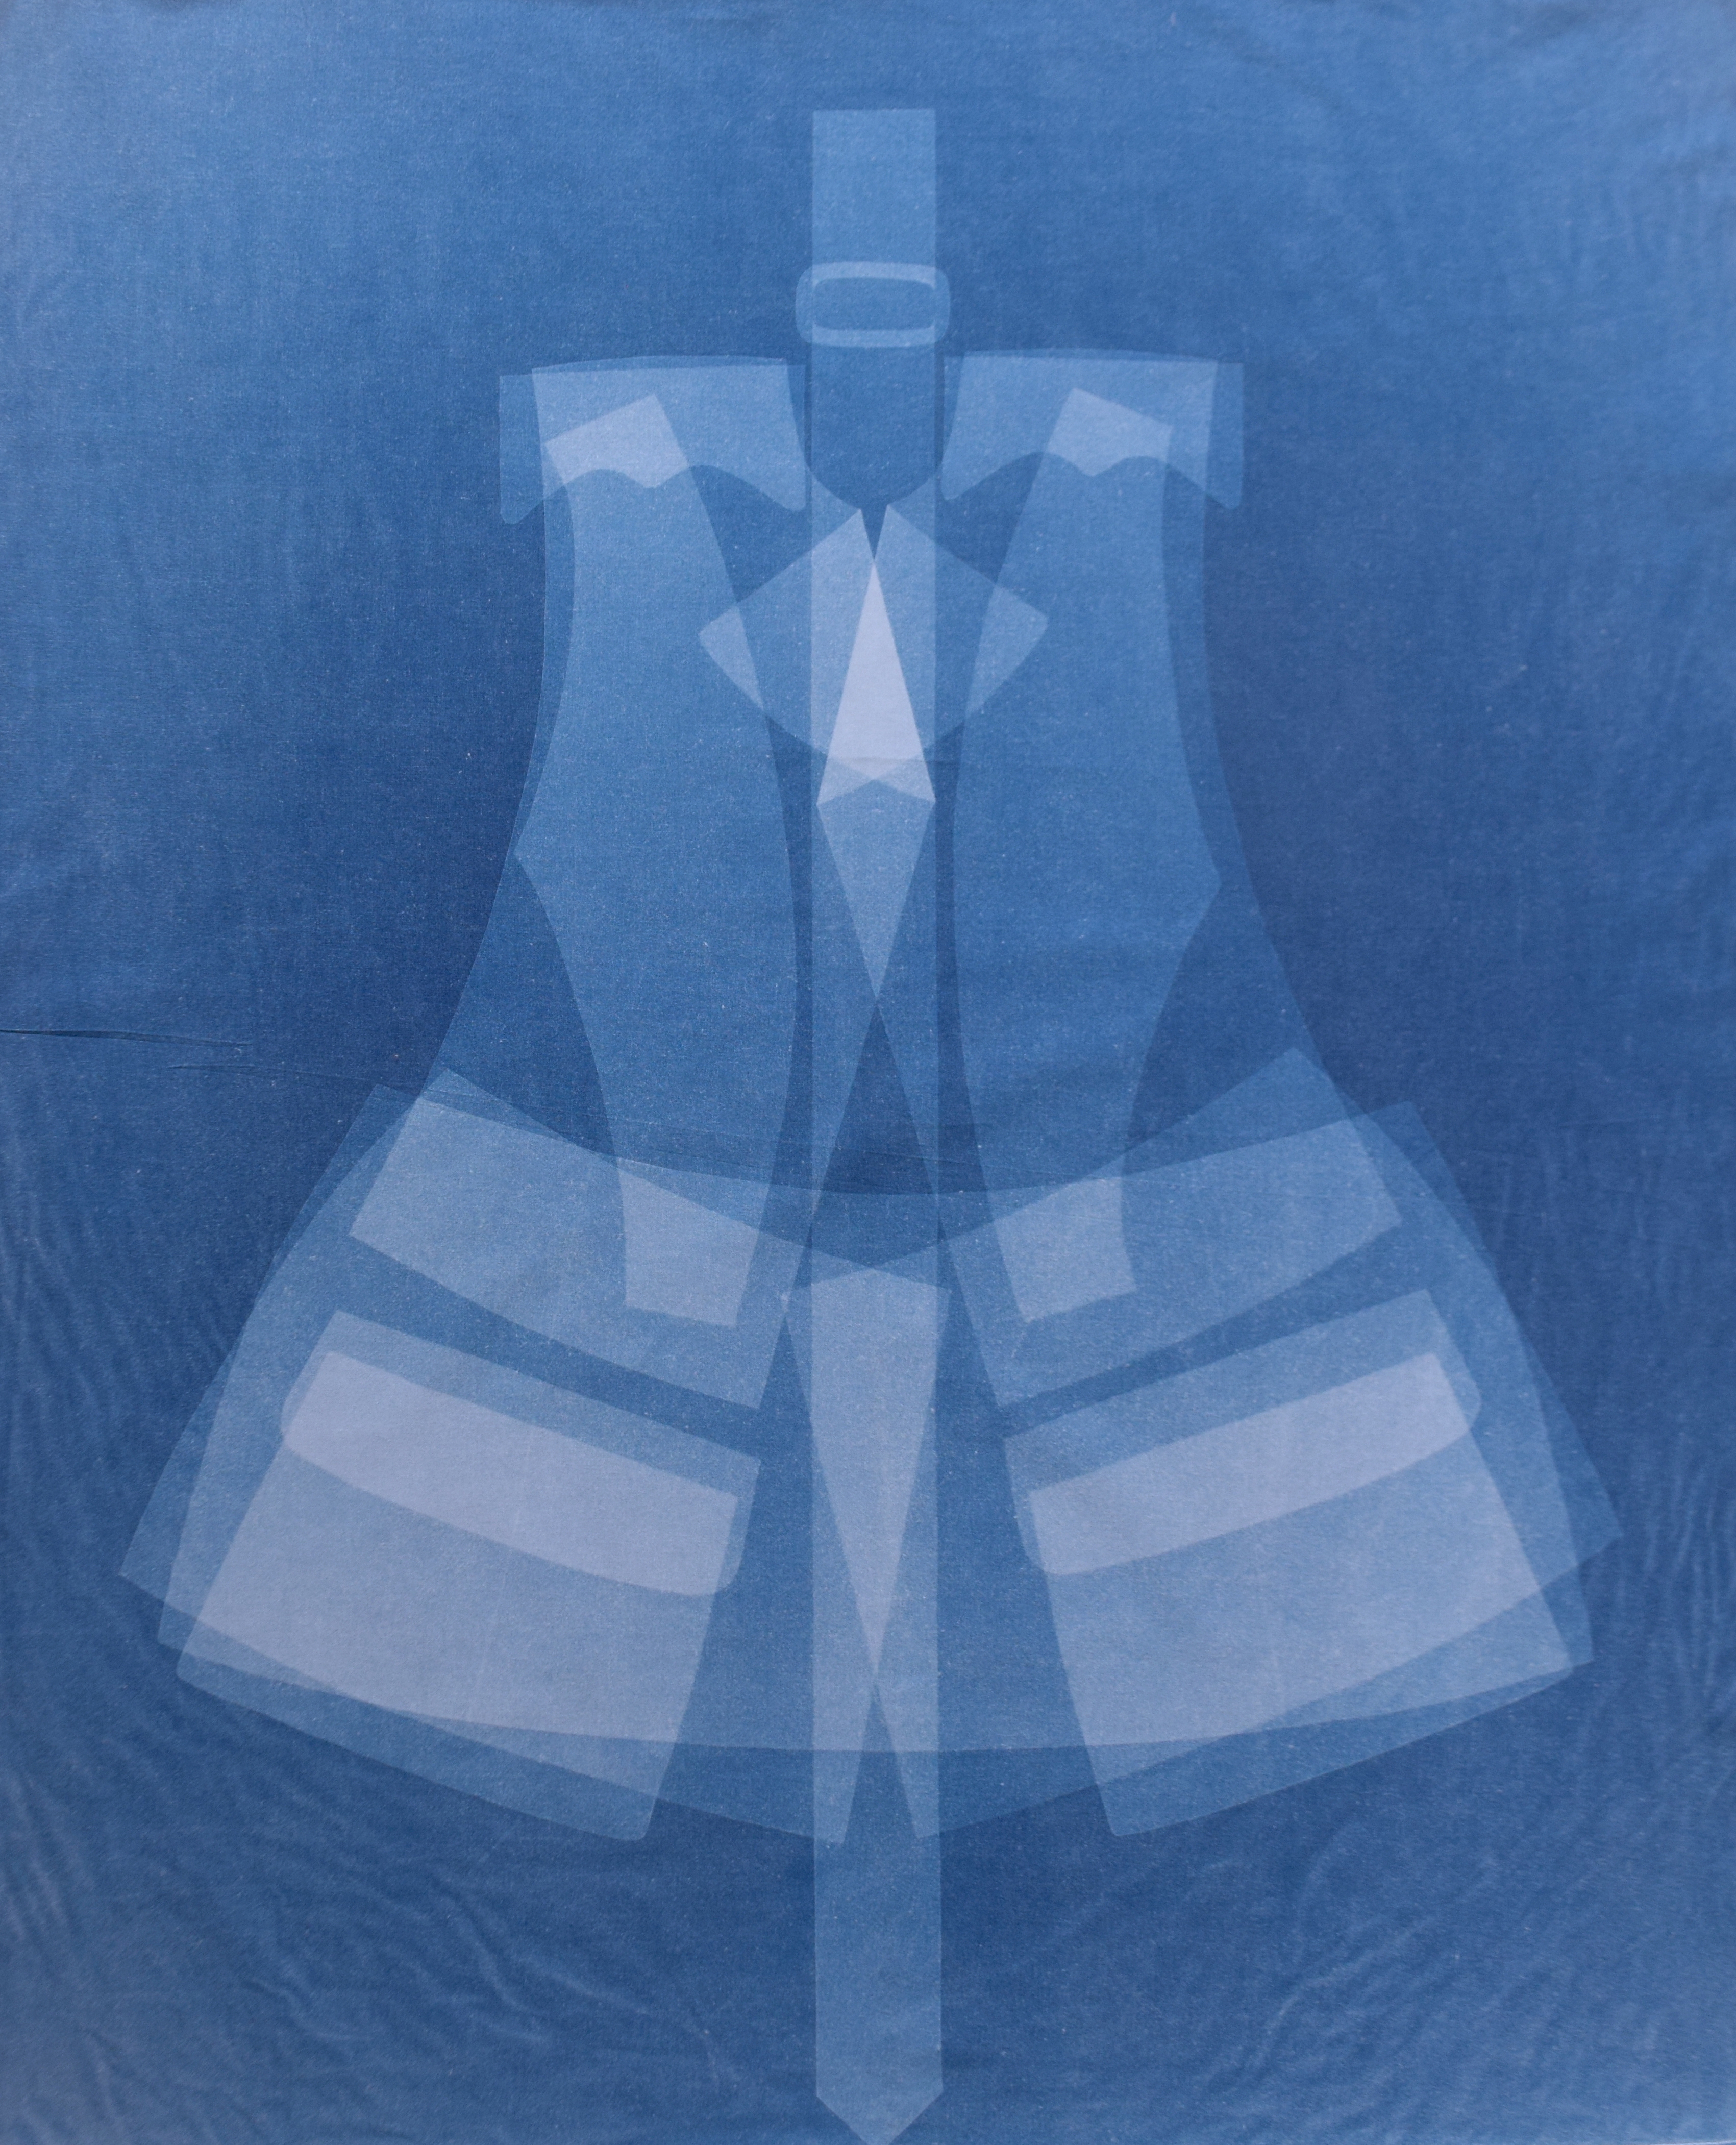 20 Marion, 2019, cyanotype on fabric (detail)